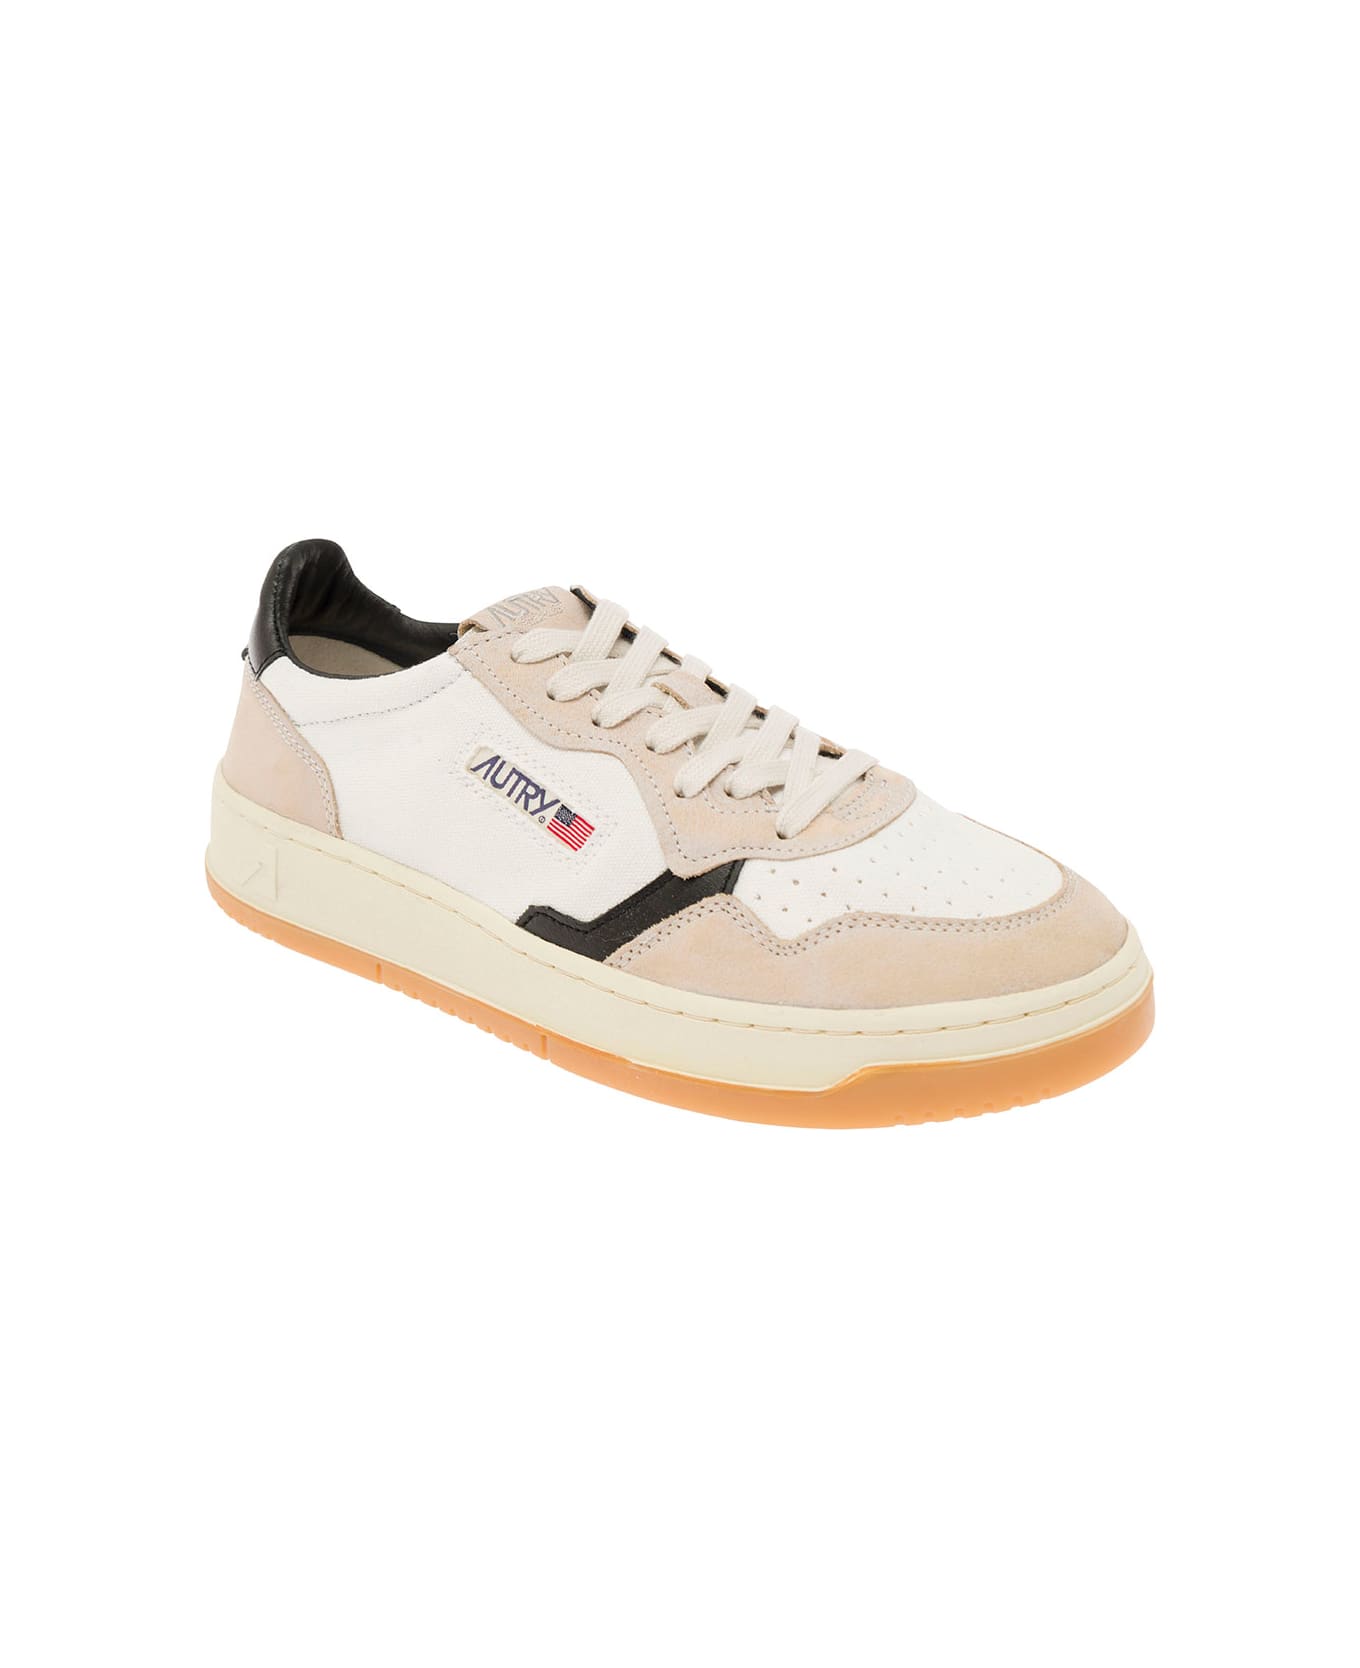 Autry 'medalist Canvas' Multicolor Low Top Sneakers With Suede Insert In Canvas Man - White スニーカー